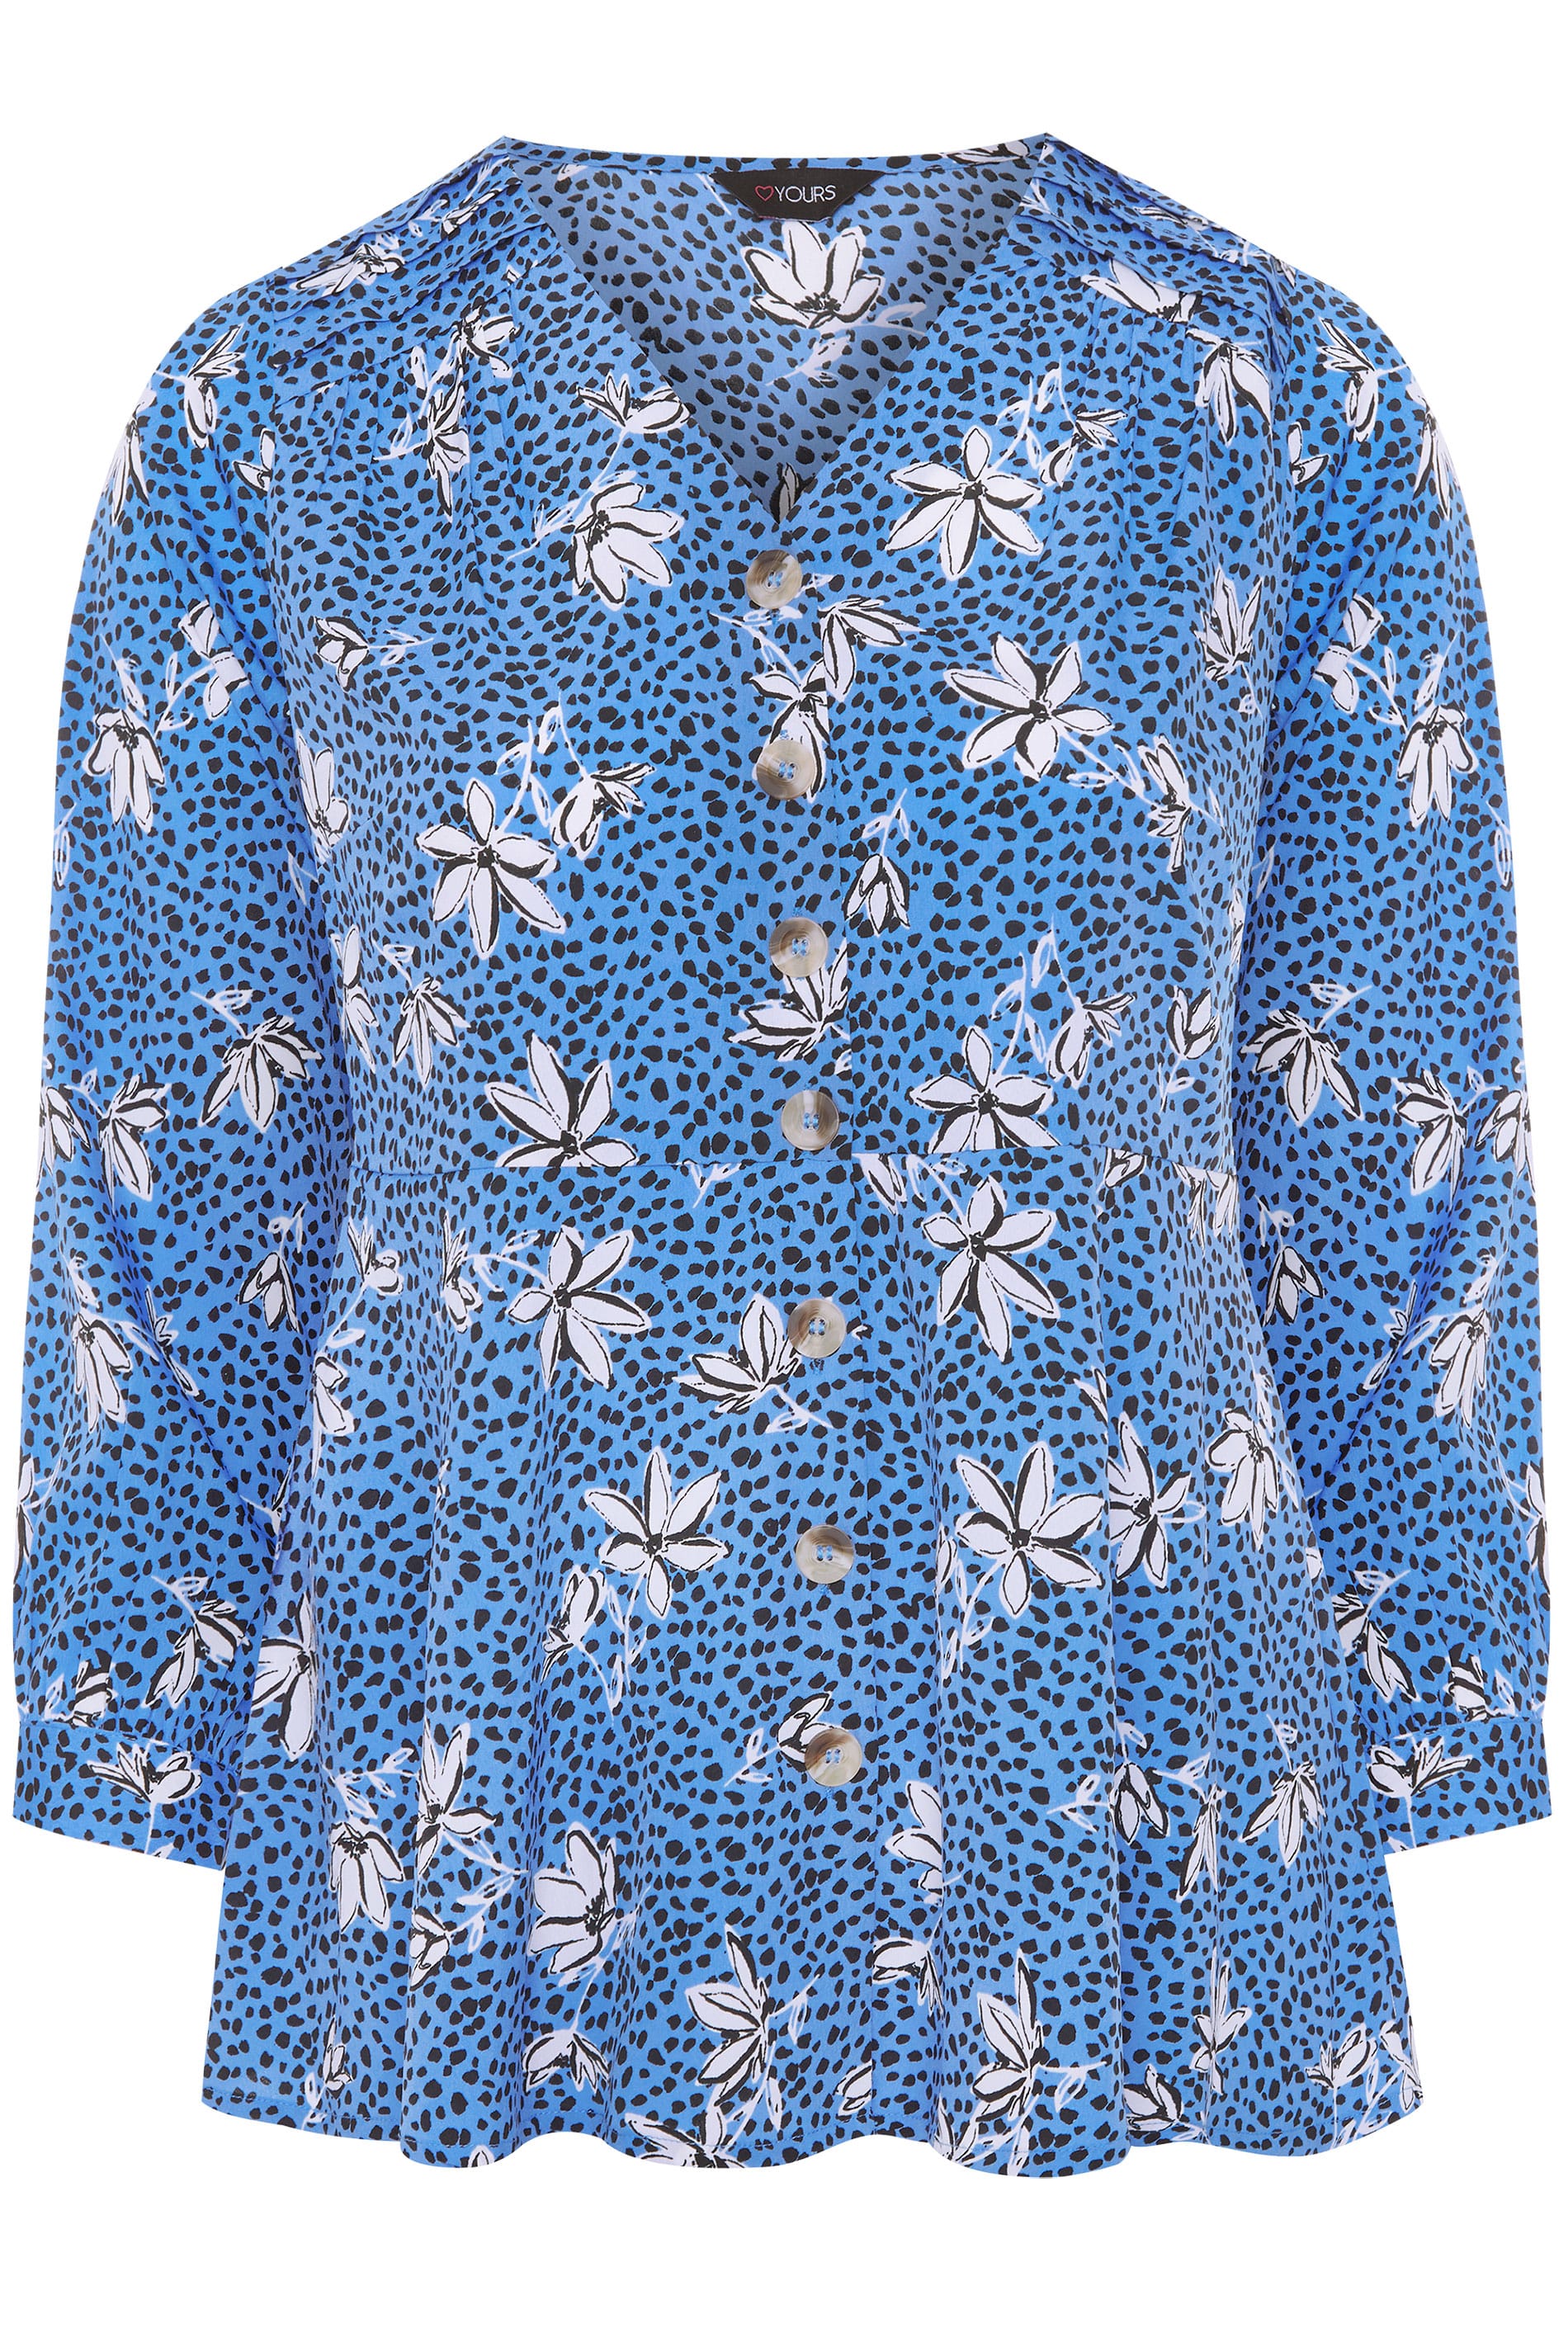 Blue Floral Button Peplum Blouse | Yours Clothing